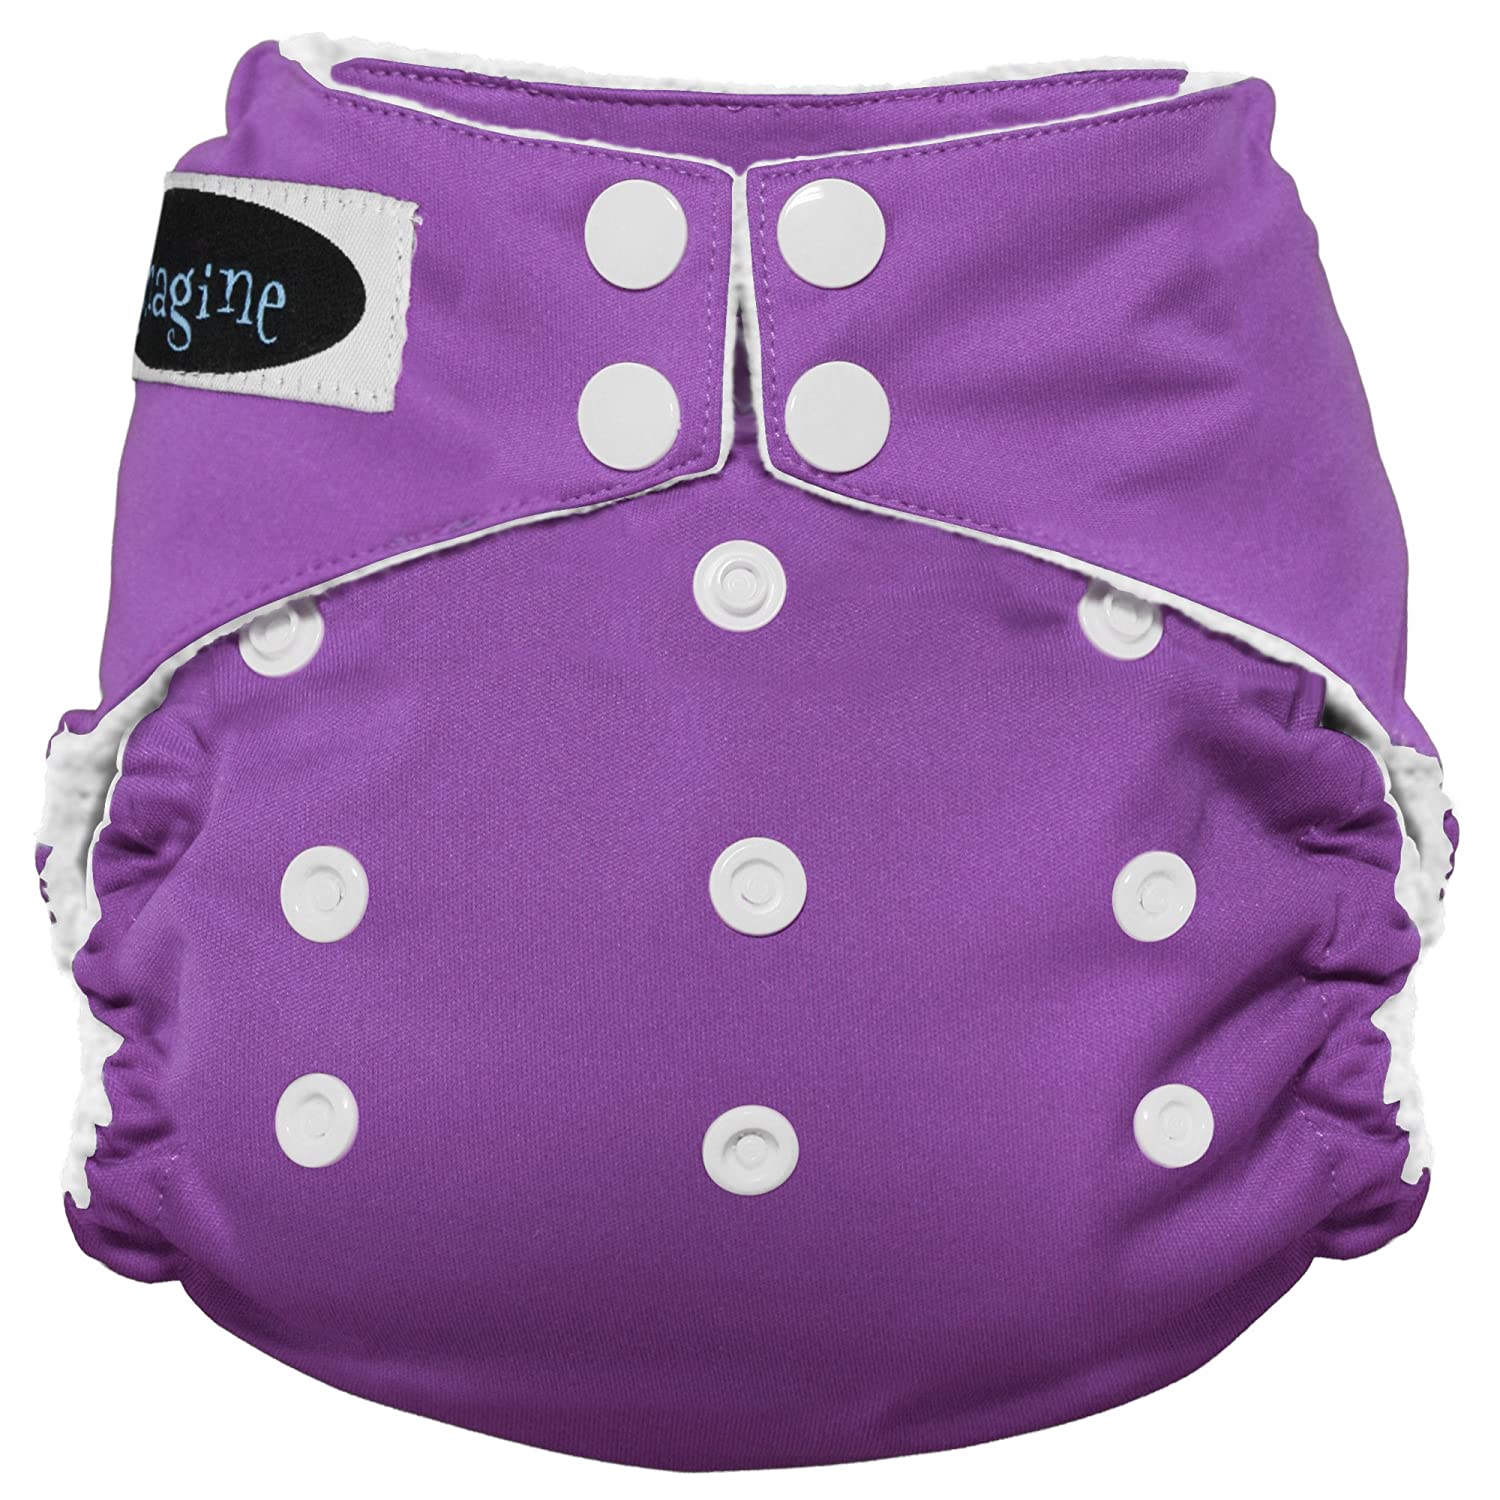 8 Best Cheap AIO Cloth Diapers 2022 - Buying Guide 1